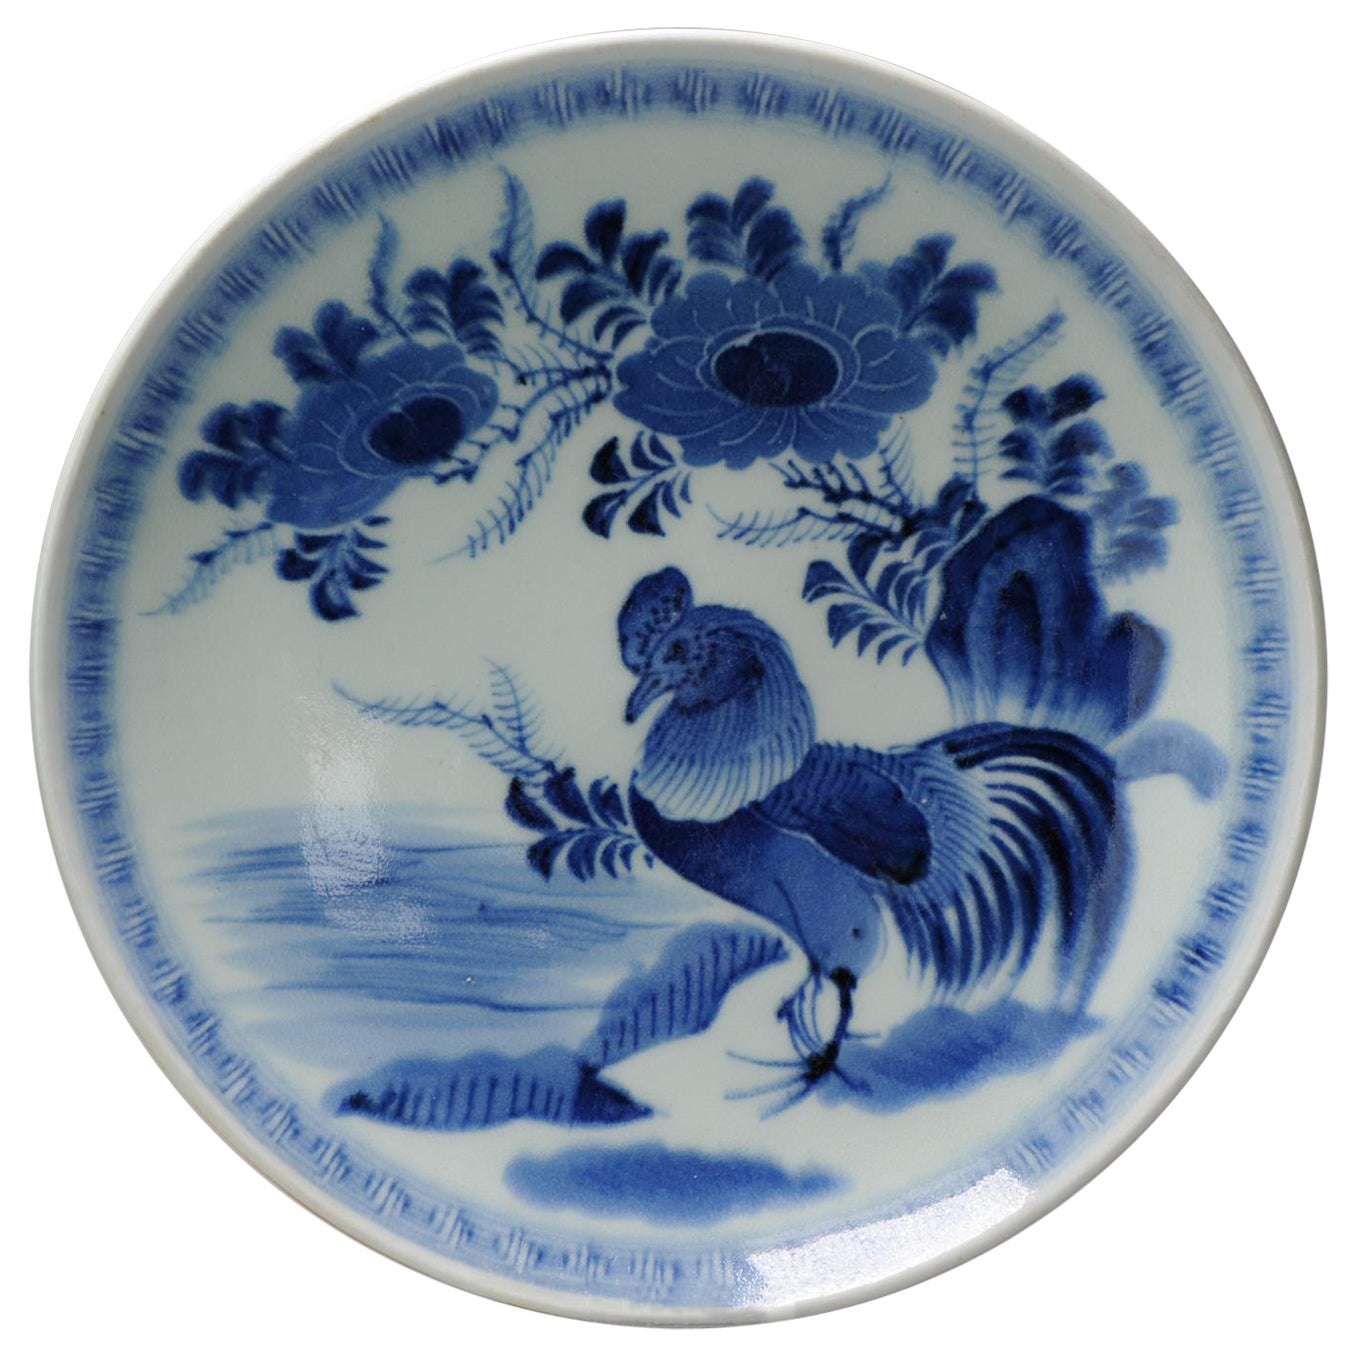 Antique Japanese Porcelain Rooster Plate Blue White Dish, 18th Century